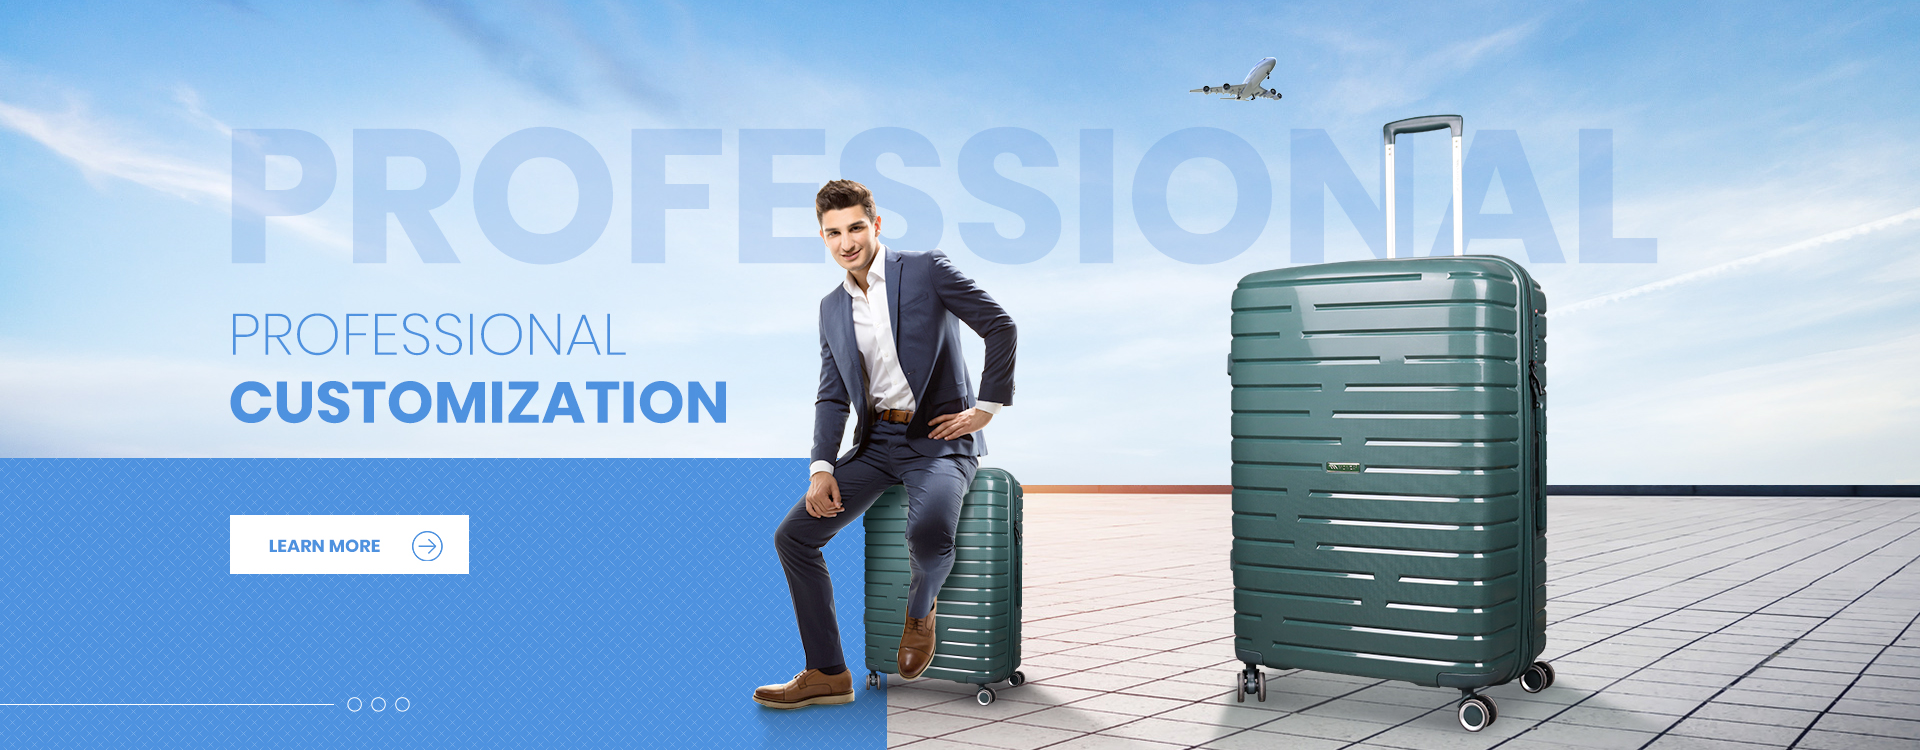 Abs Luggage, Cabin Luggage, Travel Luggage - Shire